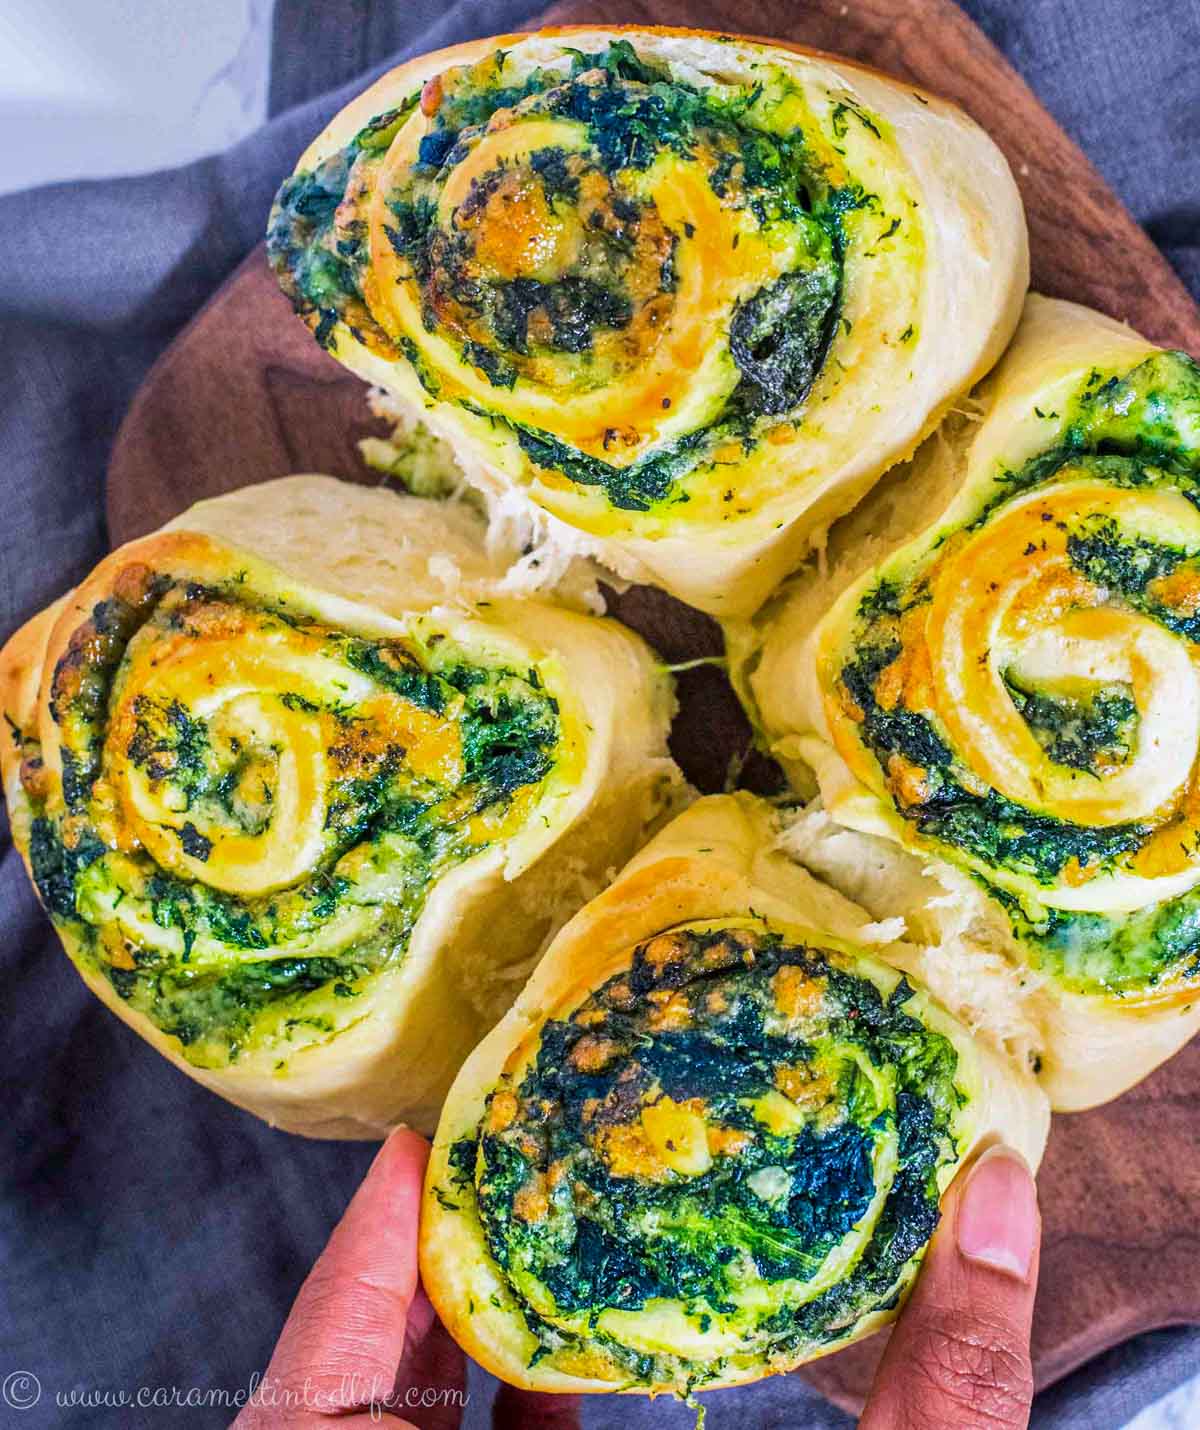 Fingers pulling apart a spinach and cheese stuffed bread roll